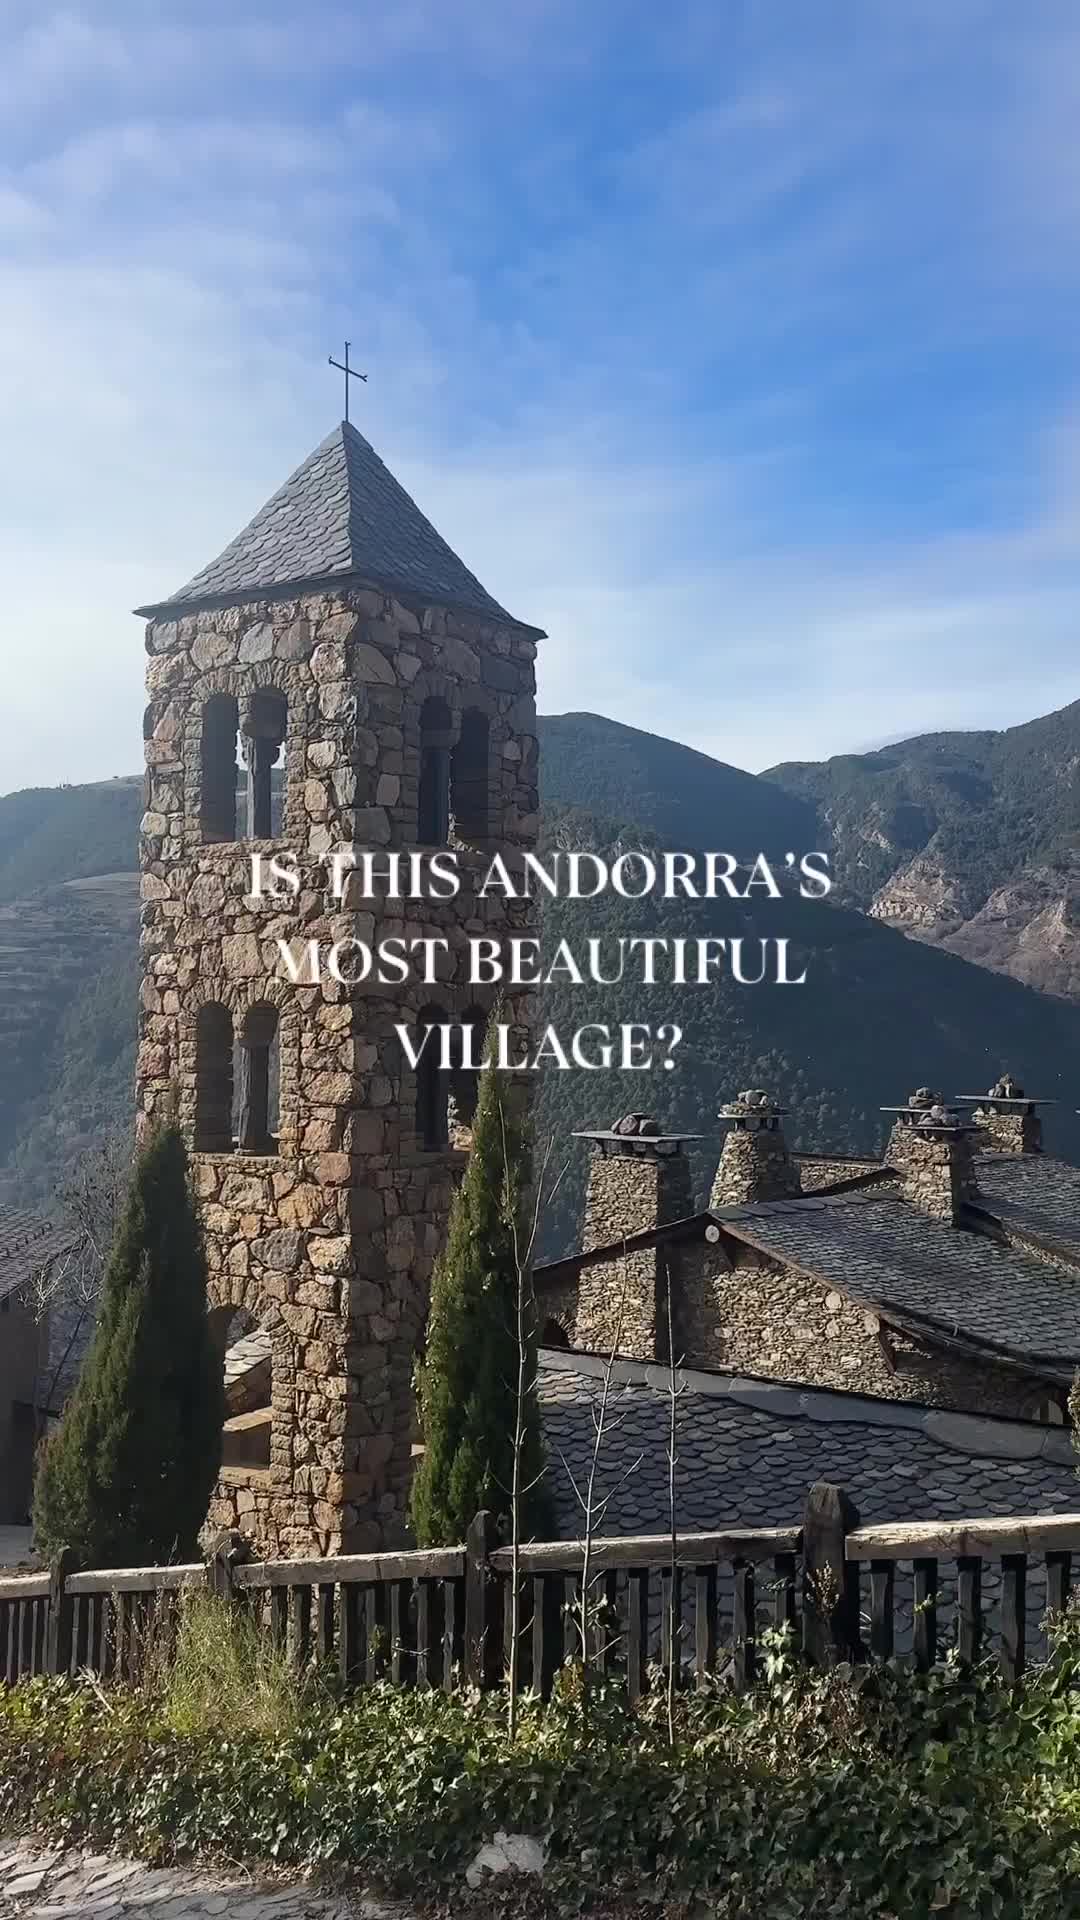 In the heart of Andorra lies a 9th-century mountain village, a living history spanning 1200 years. In the 1970s, it was sold to a private individual. In 2006, a team of architects, historians, and craftsmen was invited to breathe new life into the village. The goal was to restore each house and the church to a medieval state, offering a glimpse into the captivating world of a Pyrenean village from centuries past.

Now home to 23 families, mostly Andorran, the village’s houses bear nature-inspired names instead of street addresses.

📍Aubinyà

#aubinyà #andorre #andorravillage #pyrenees #medievalvillage #andorraturisme #andorrainfo #andorrahiddengems #travelansaandorra #visitandorra